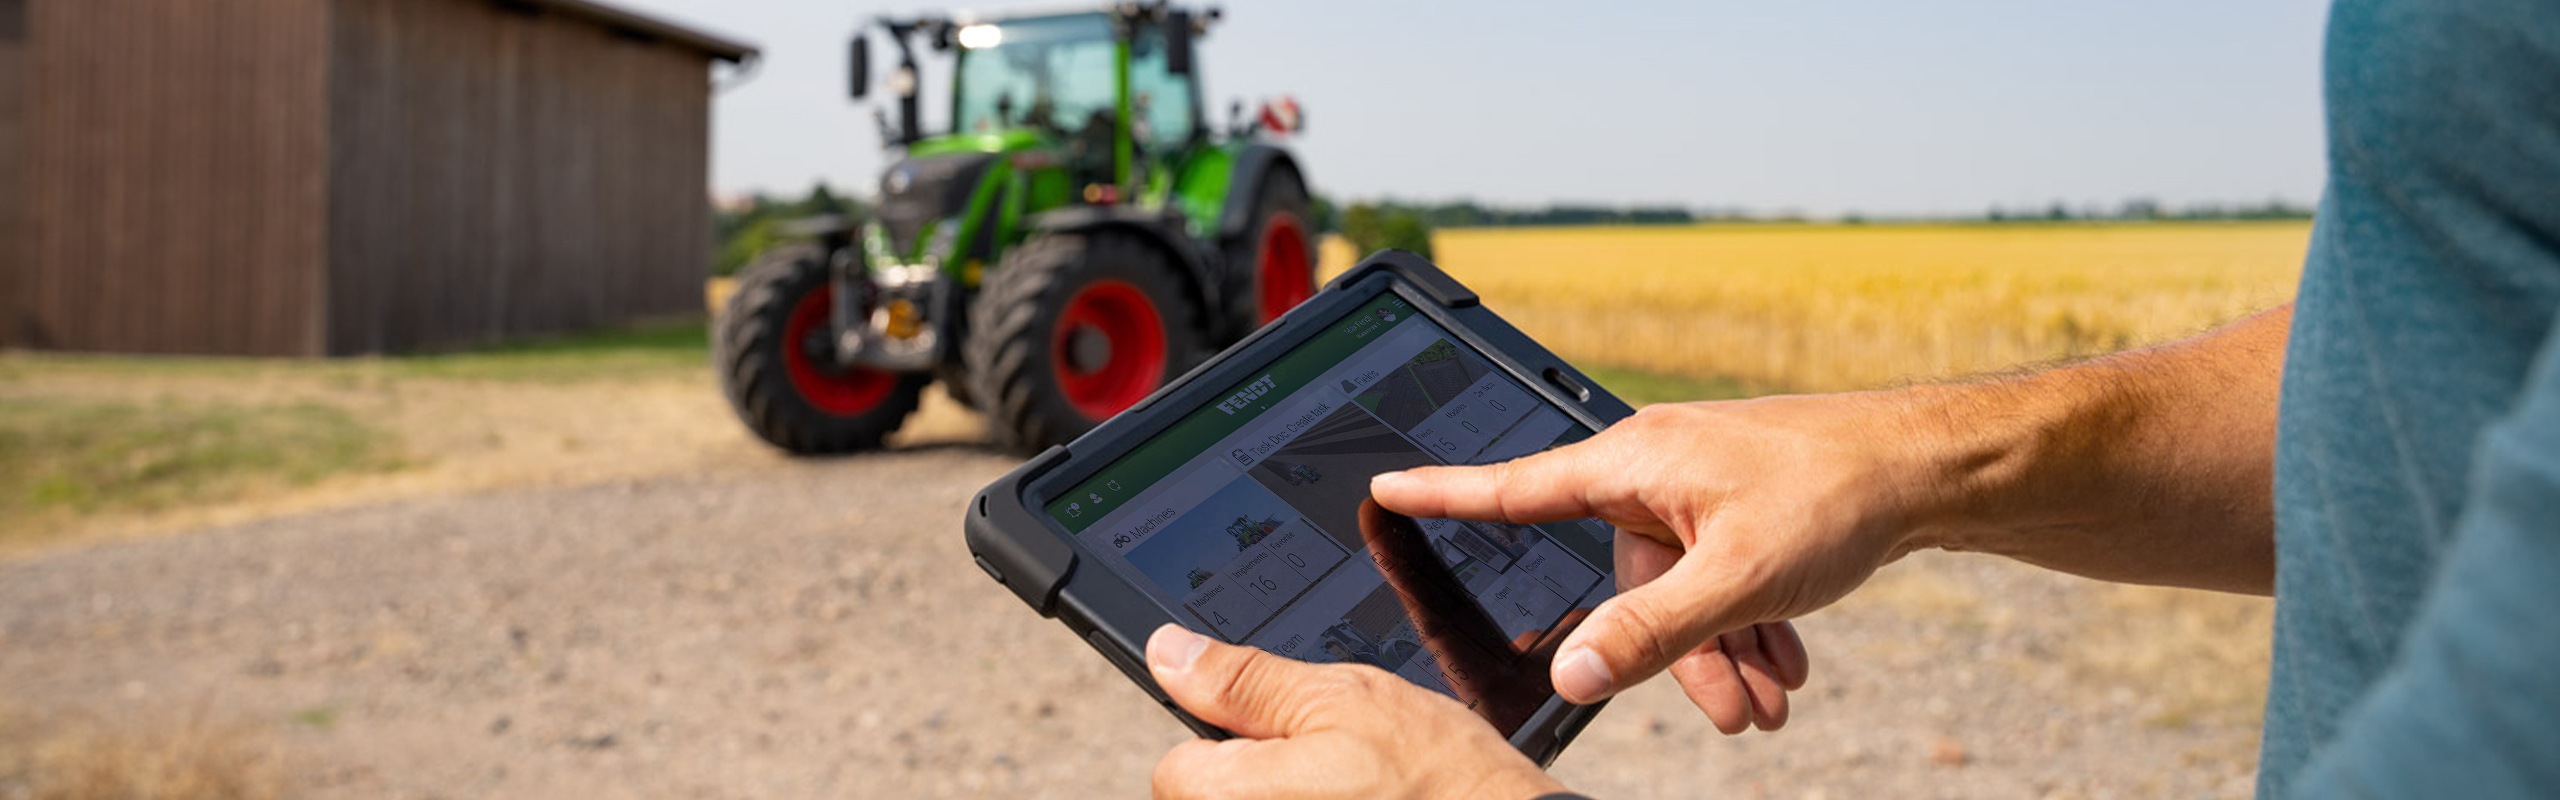 Case Fendt: Supporting from Design to Production - Meconet